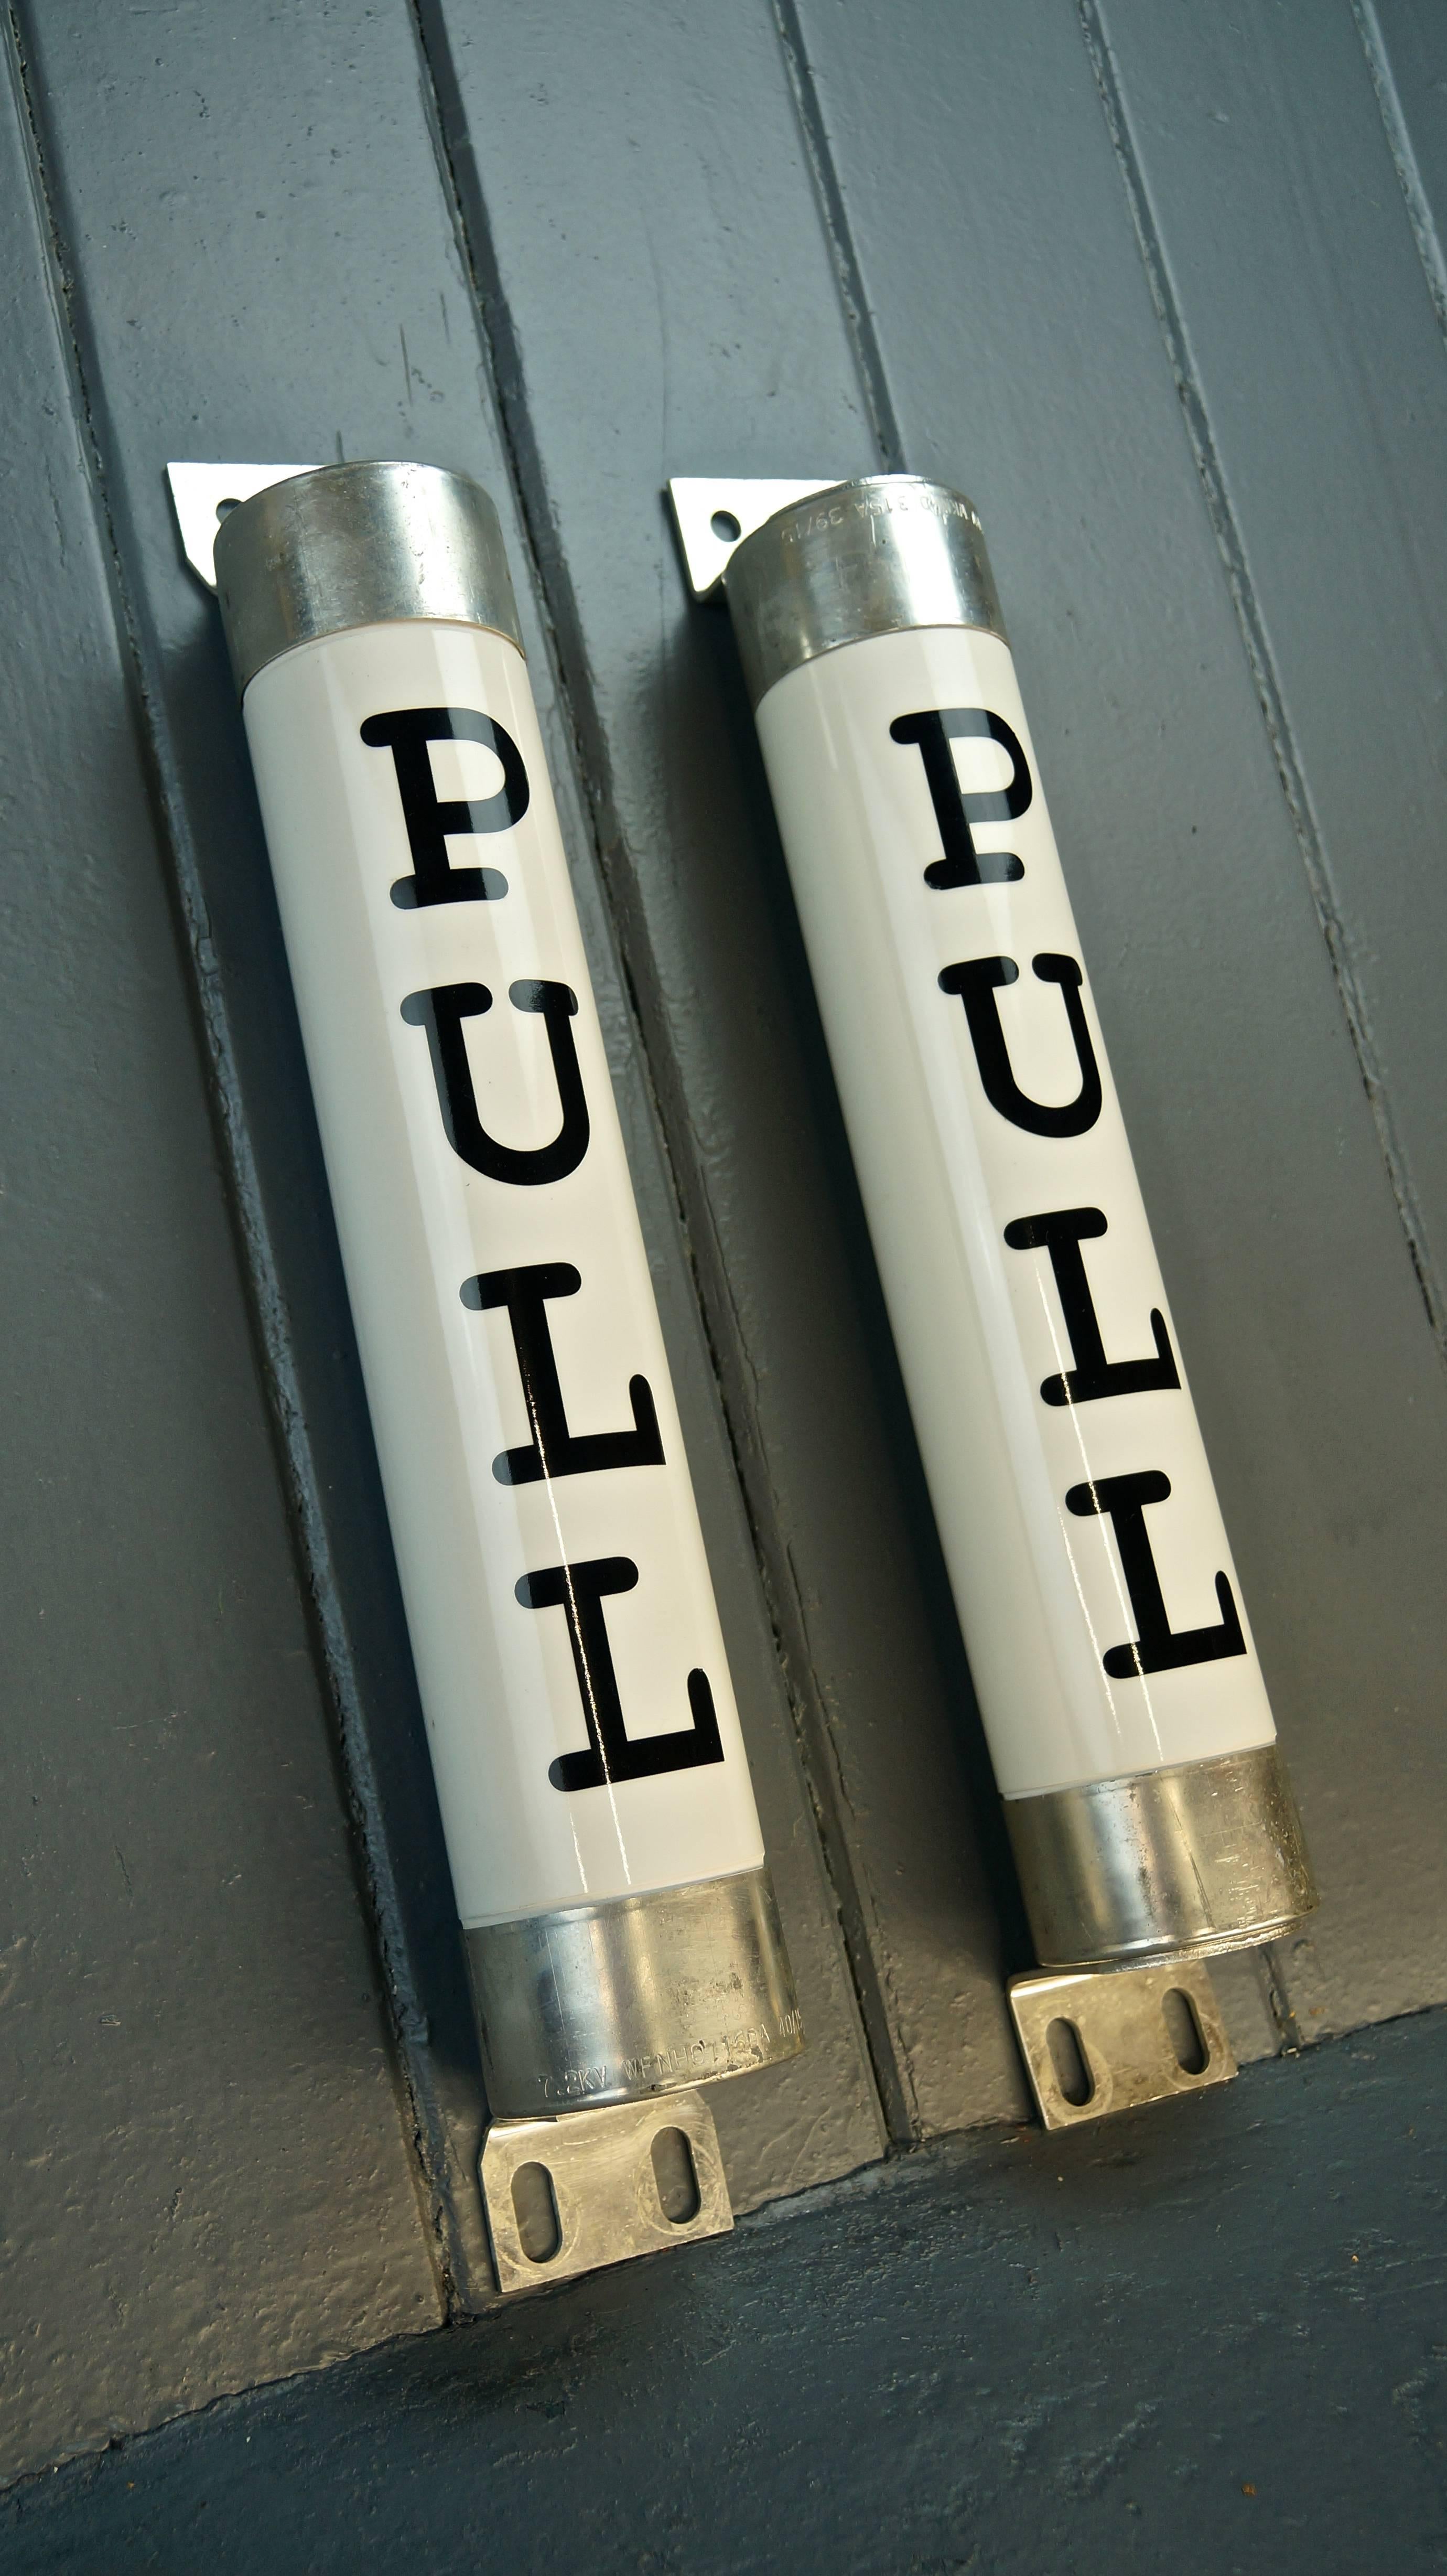 Pair of massive Industrial glazed porcelain 7.2 Kilovolt Fuses which have been converted into Door Handles 

A one off design salvaged from an old lighting factory

Measures: Height including brackets 49cm
Height not including brackets